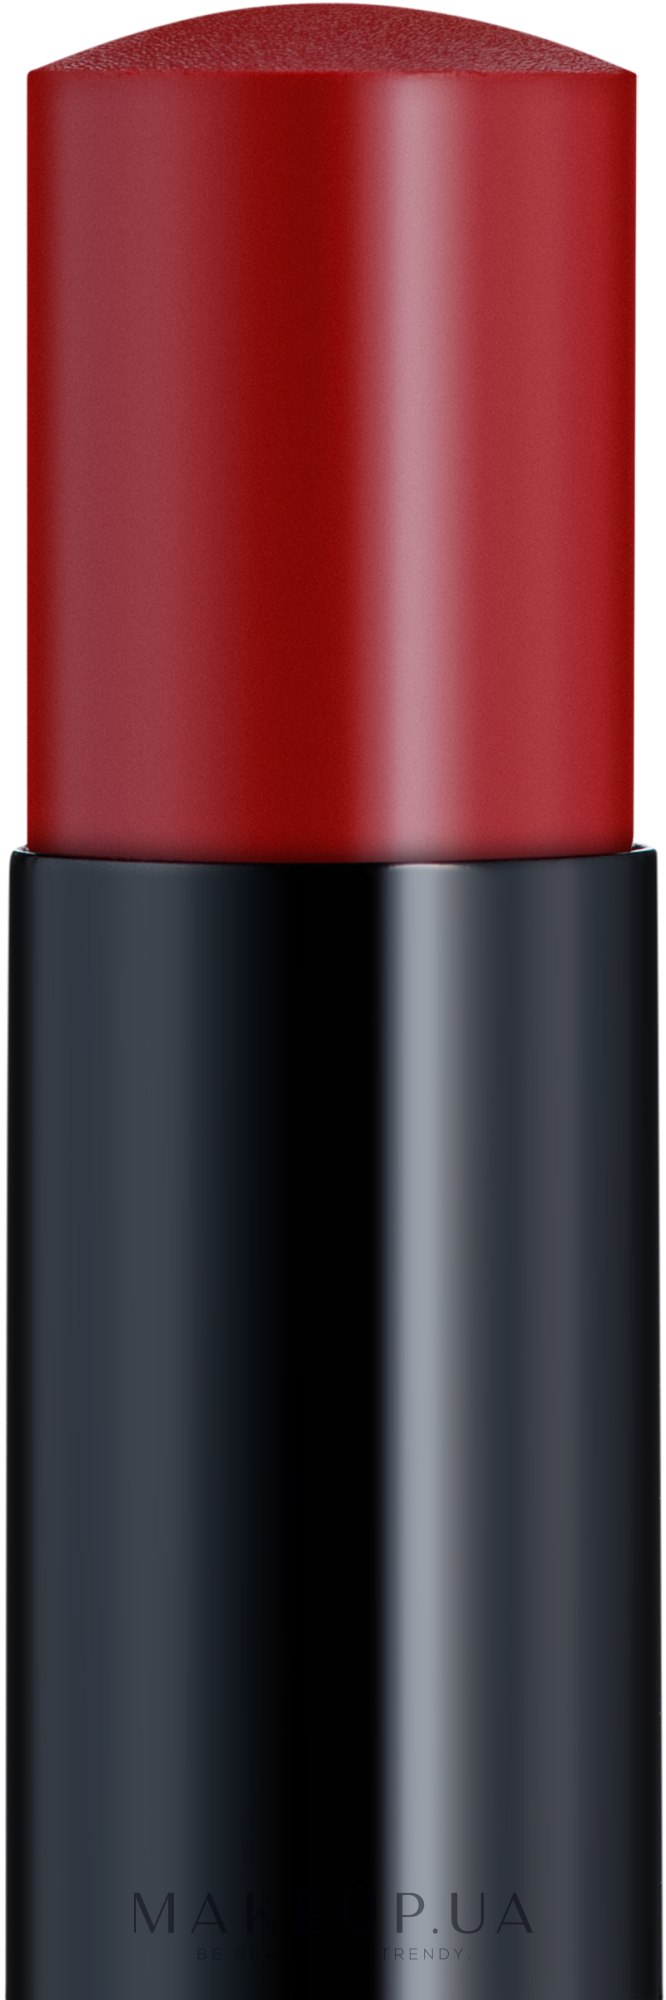 LES BEIGES LIP BALM CHANEL💄, Gallery posted by nuncrazy